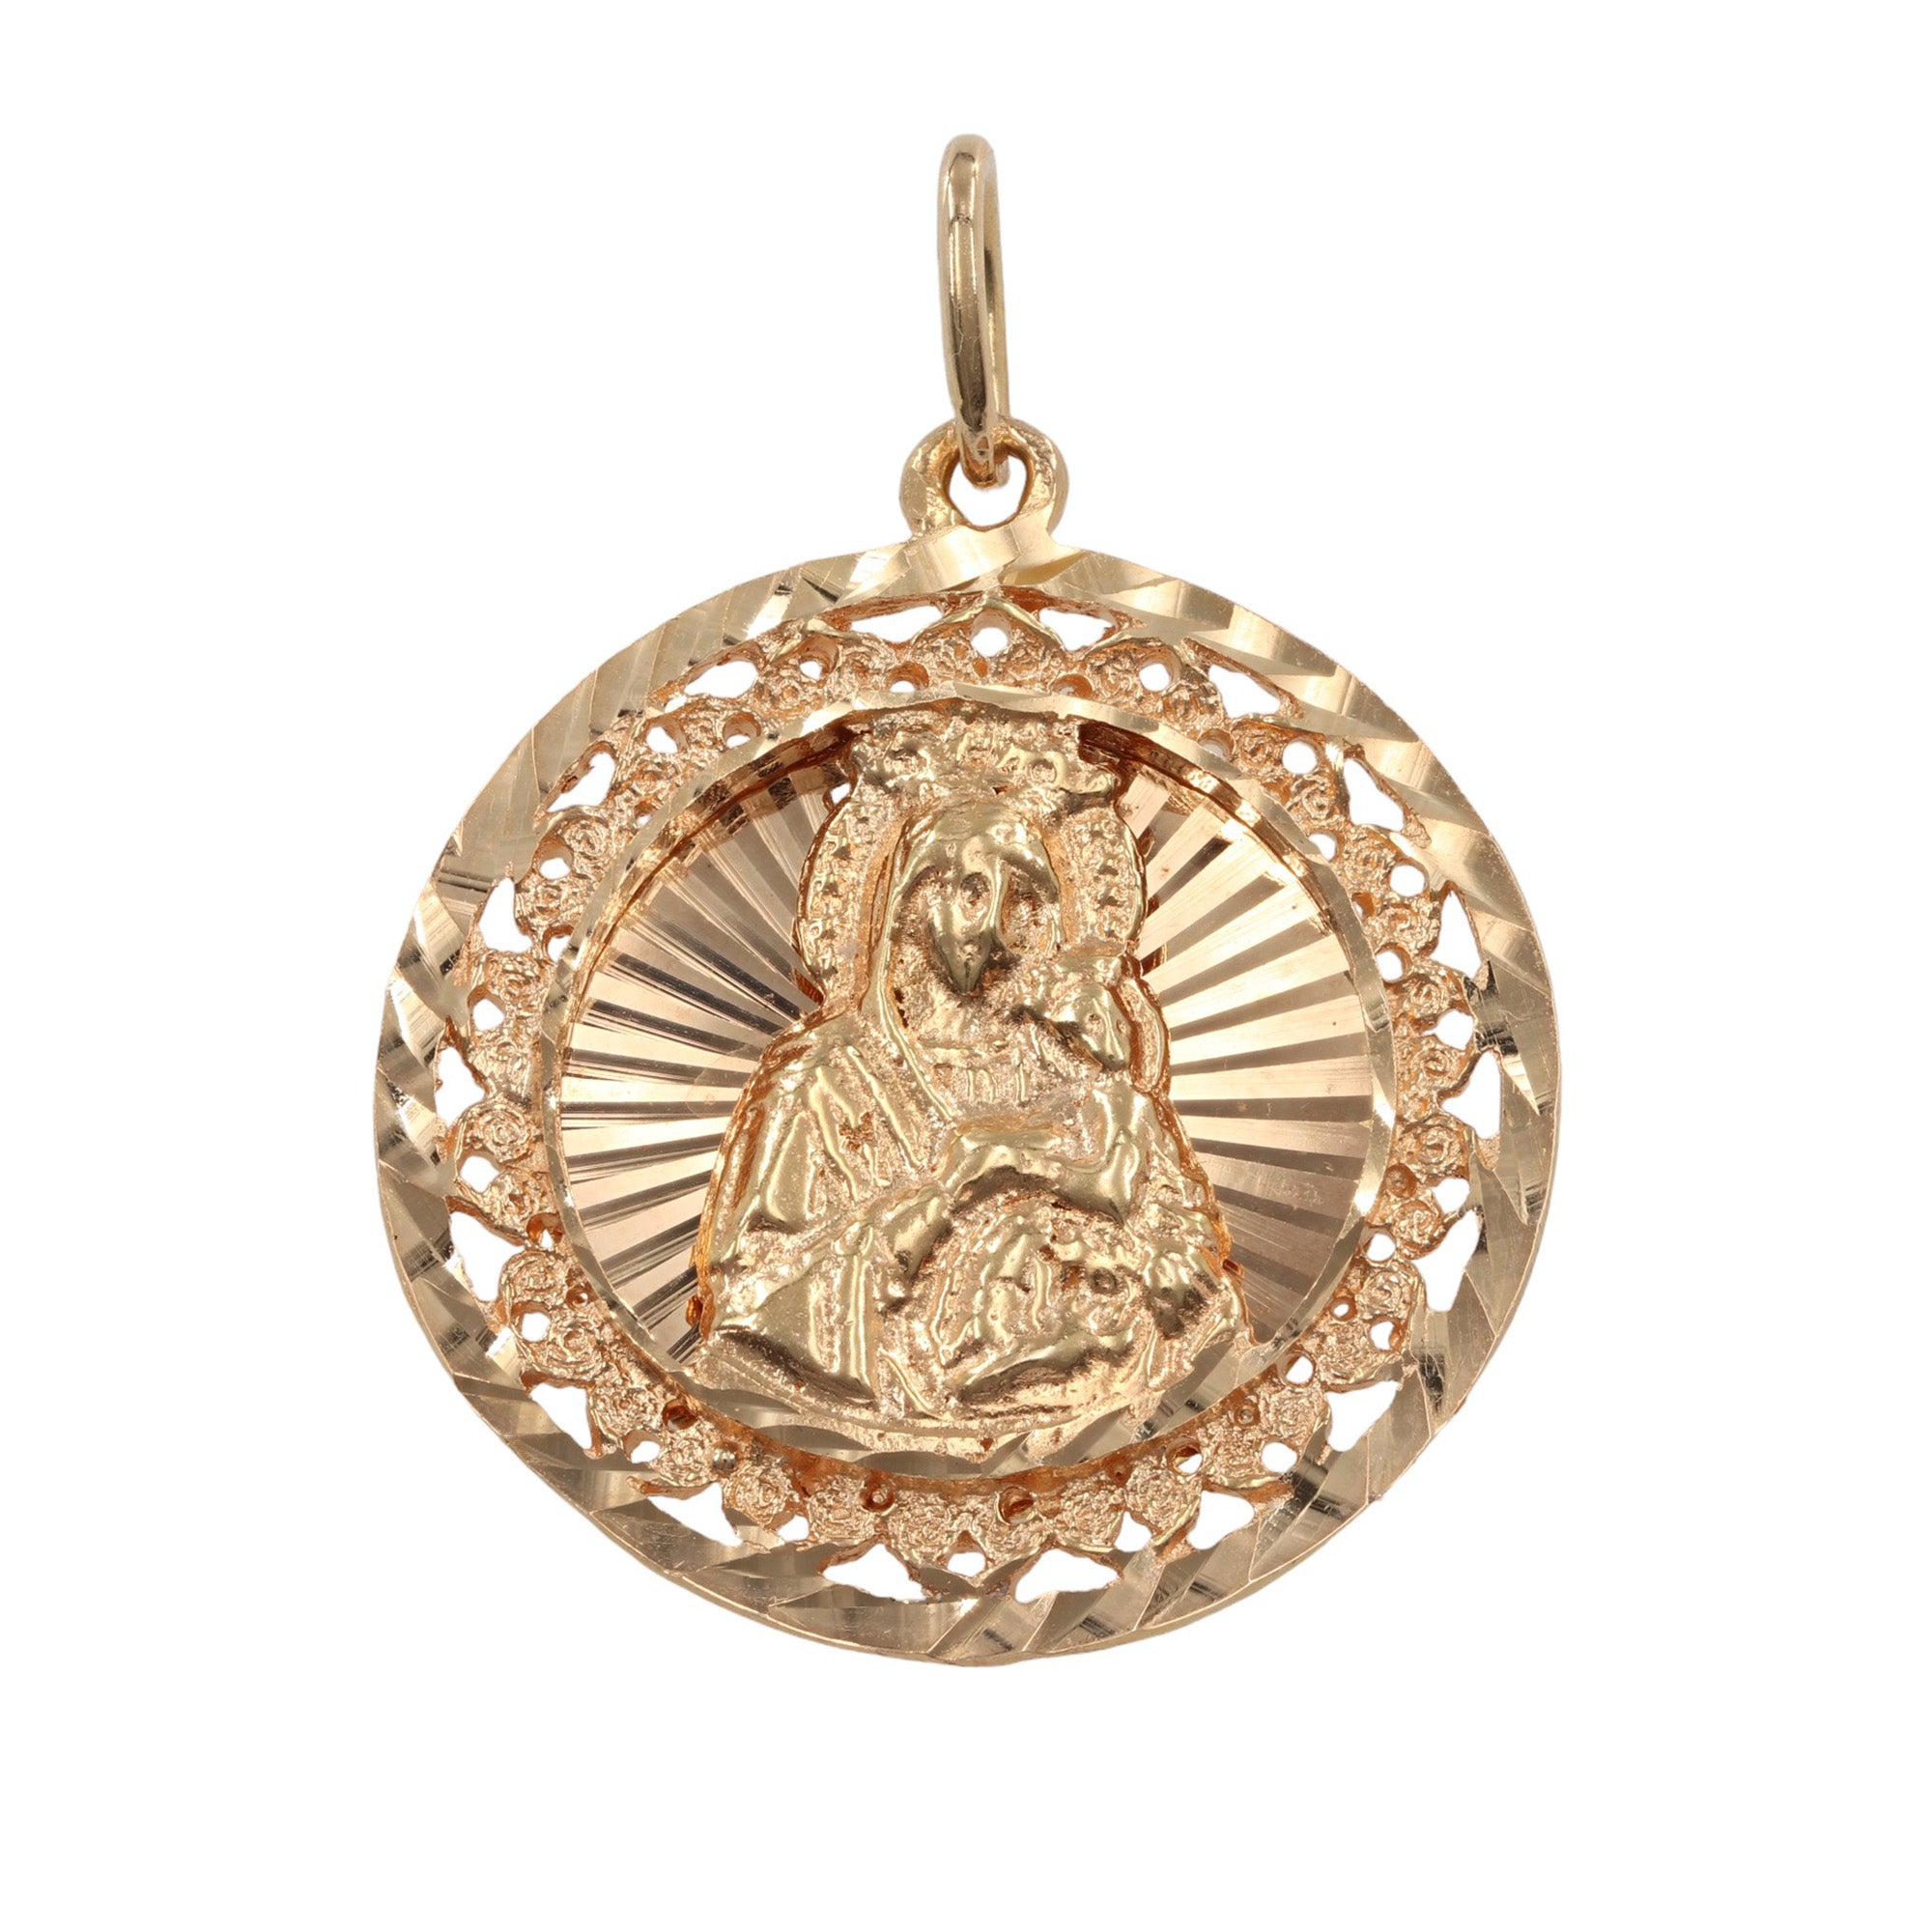 Buy 18k Gold Virgin Mary Medal Fancy Virgin Mary Charm Gold Mother Mary  Pendant Vintage Catholic Religious Pendant Online in India - Etsy